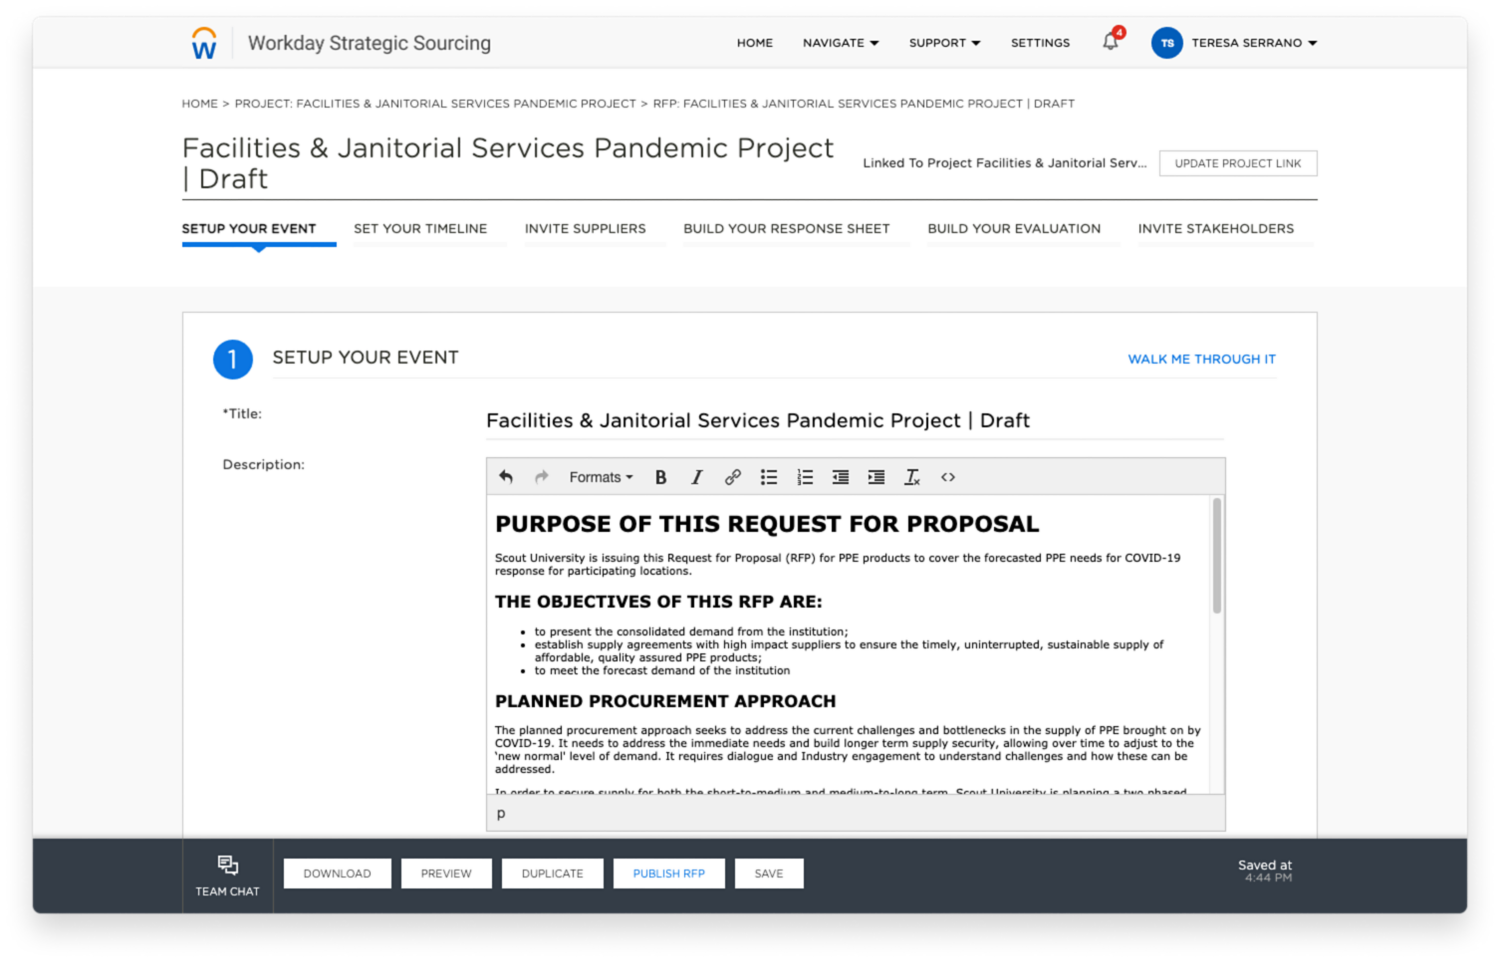 Workday Strategic Sourcing facilities and janitorial services pandemic project example RFP for the higher education industry.